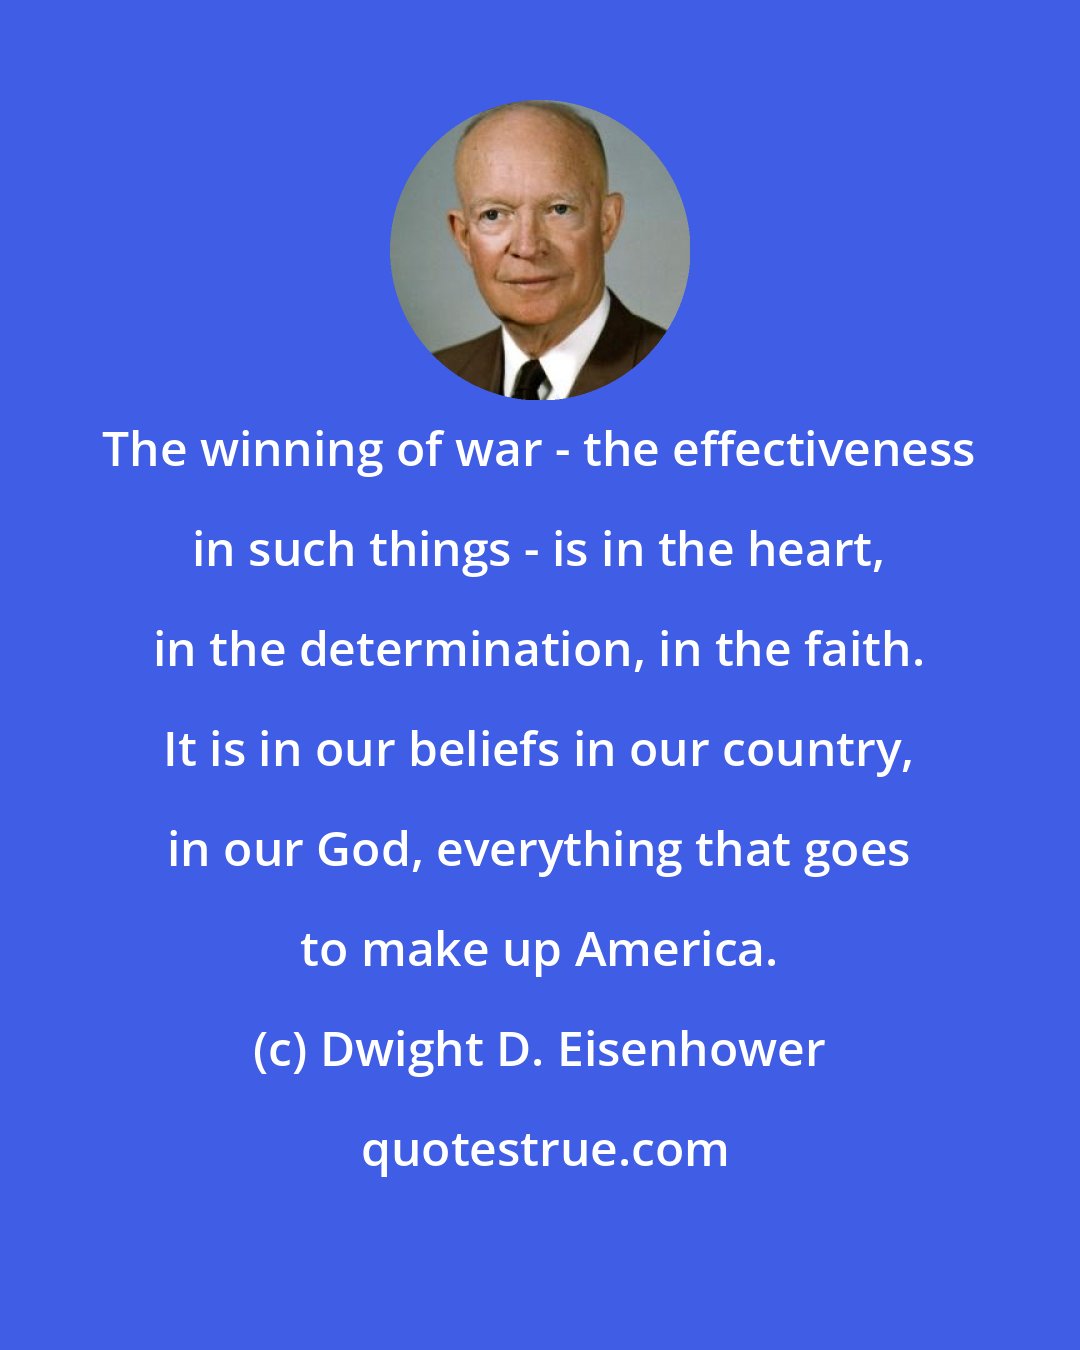 Dwight D. Eisenhower: The winning of war - the effectiveness in such things - is in the heart, in the determination, in the faith. It is in our beliefs in our country, in our God, everything that goes to make up America.